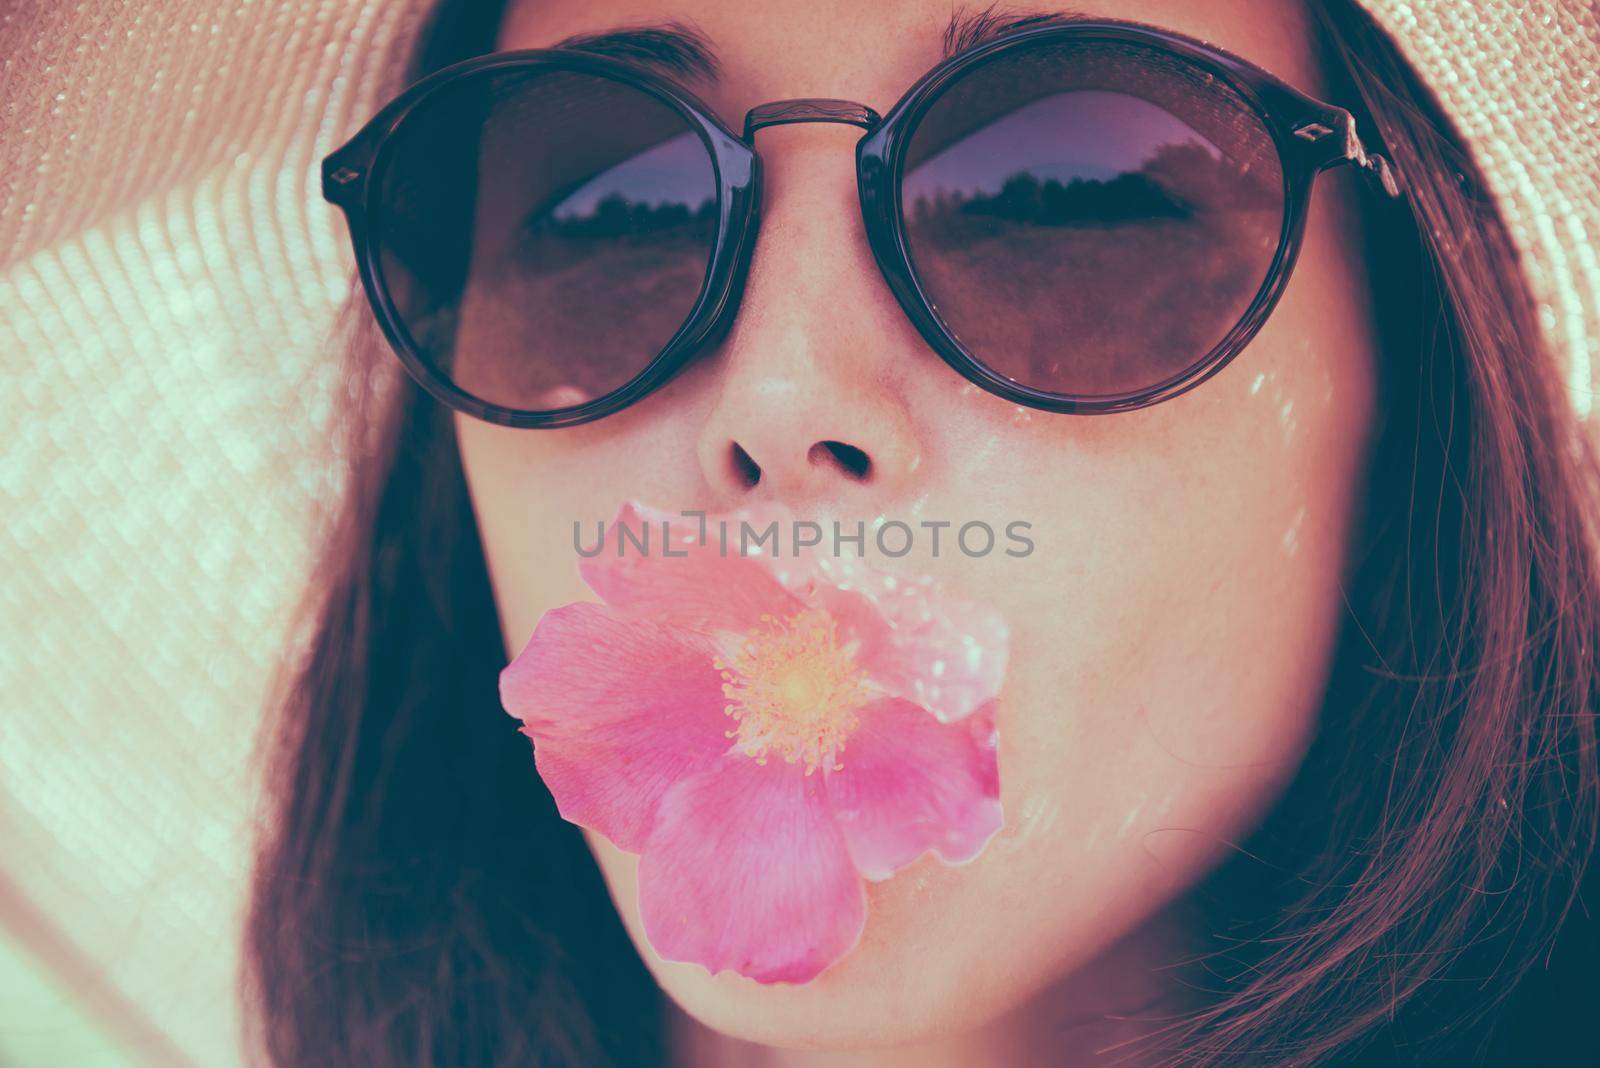 Portrait of attractive girl in sunglasses with pink flower, concept of summer mood. Fashionable and beautiful summer girl. Image with instagram color effect